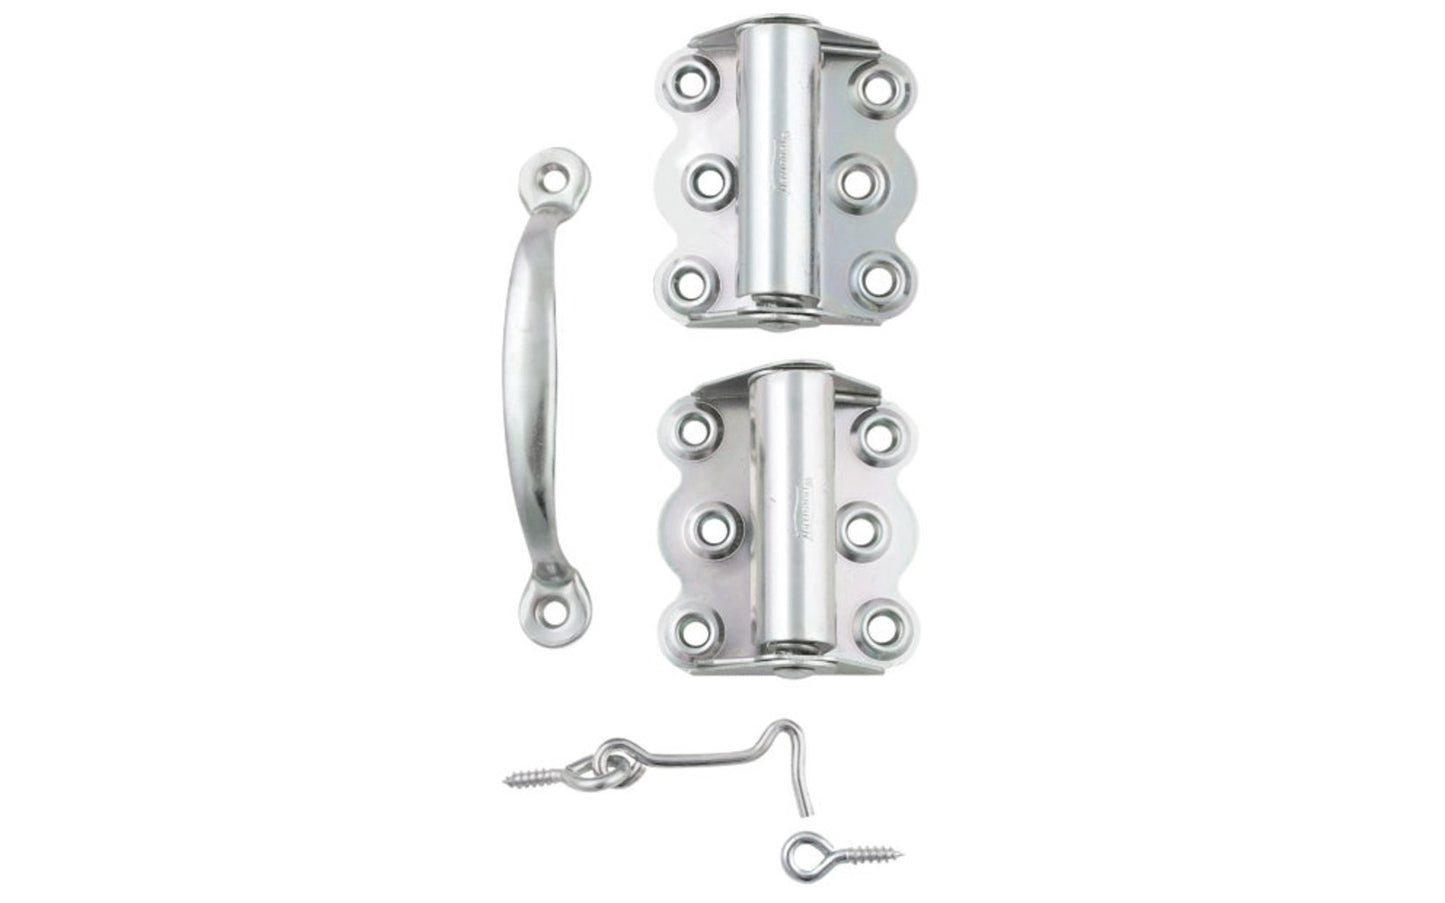 Zinc Plated Steel Screen / Storm Door Set is designed for wood screen & storm doors. Contains a pair of zinc plated 2-3/4" full surface spring hinges, a zinc plated screen door handle pull with 4-1/4" on centers, & a hook & eye. The tight pin with enclosed spring is for right or left hand applications.